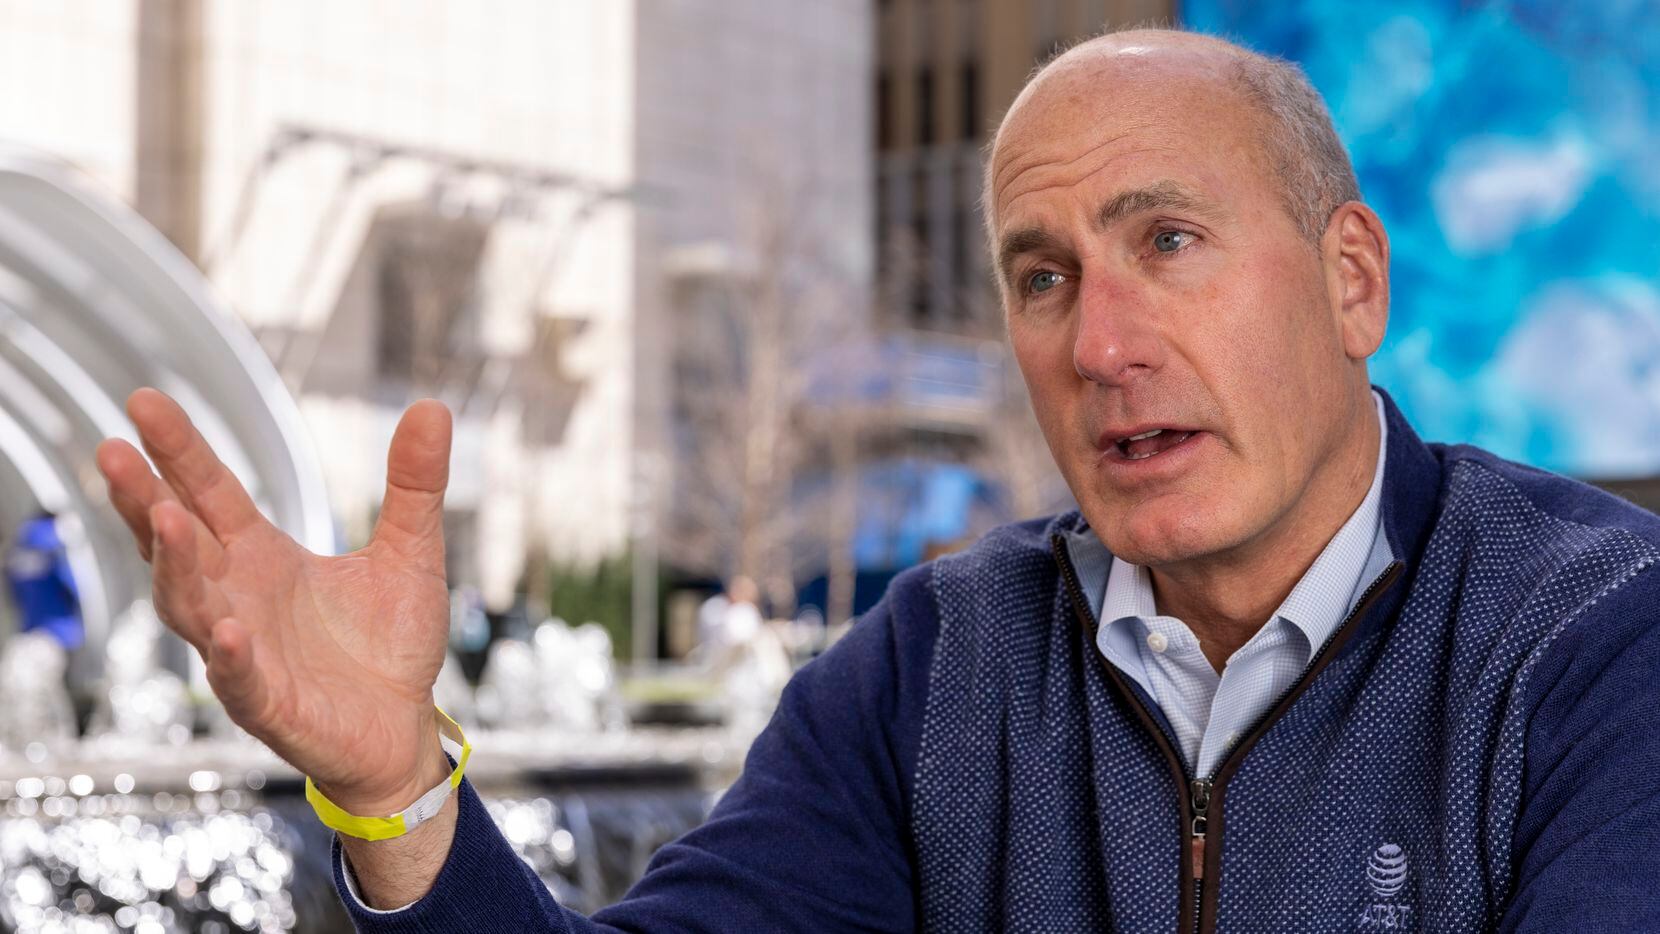 AT&T CEO John Stankey said spinning off WarnerMedia has freed him up from distractions so he...